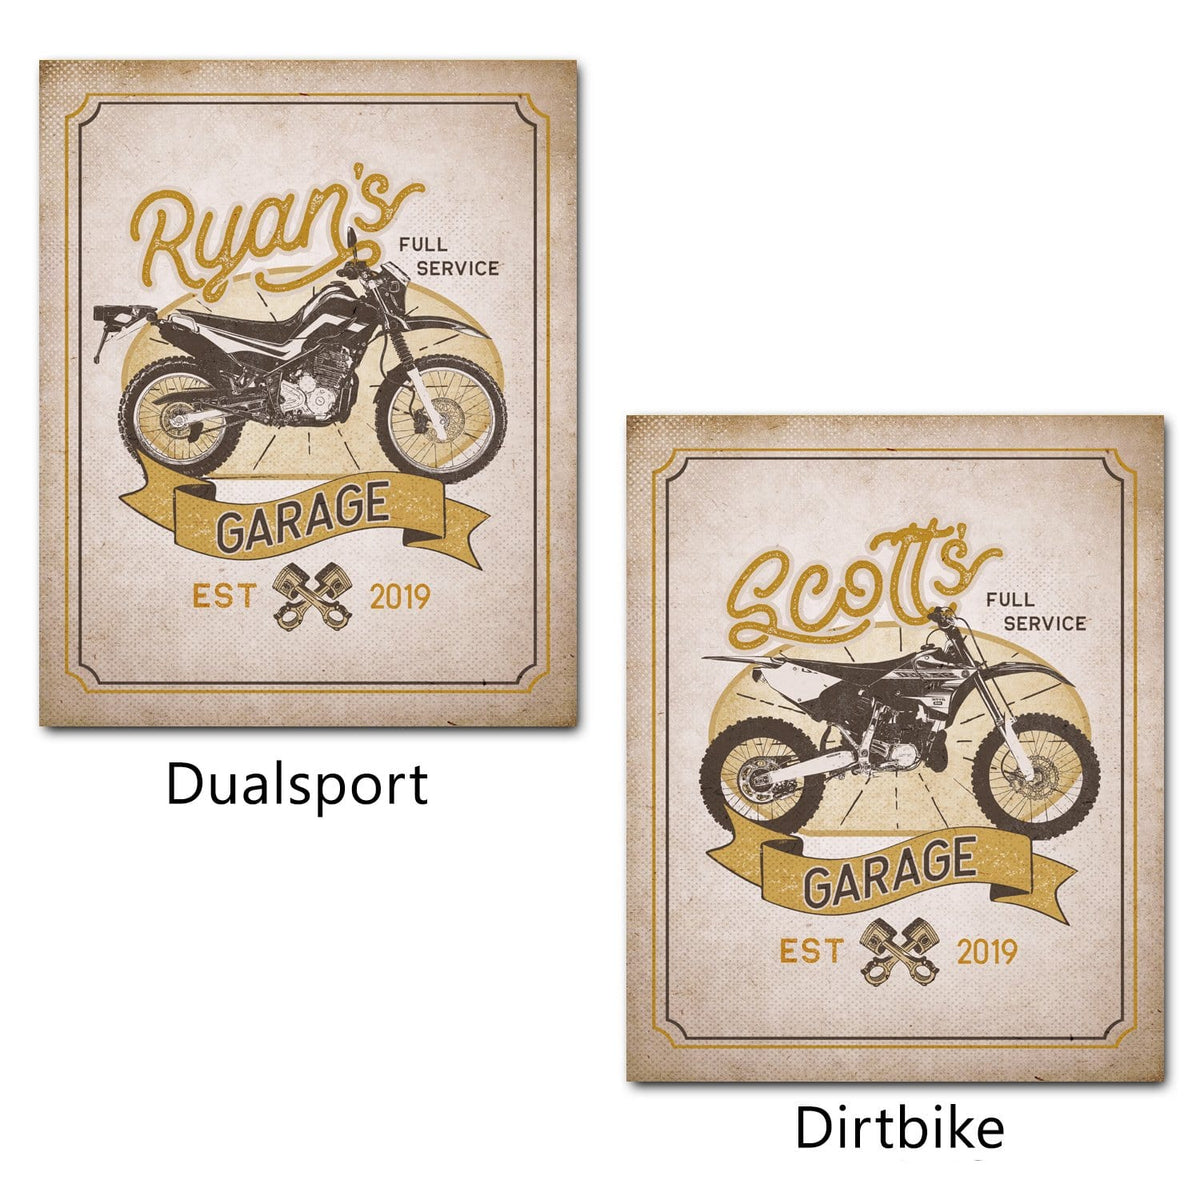 Customizable Retro Motorcycle Signs of a Dual sport and Dirt bike